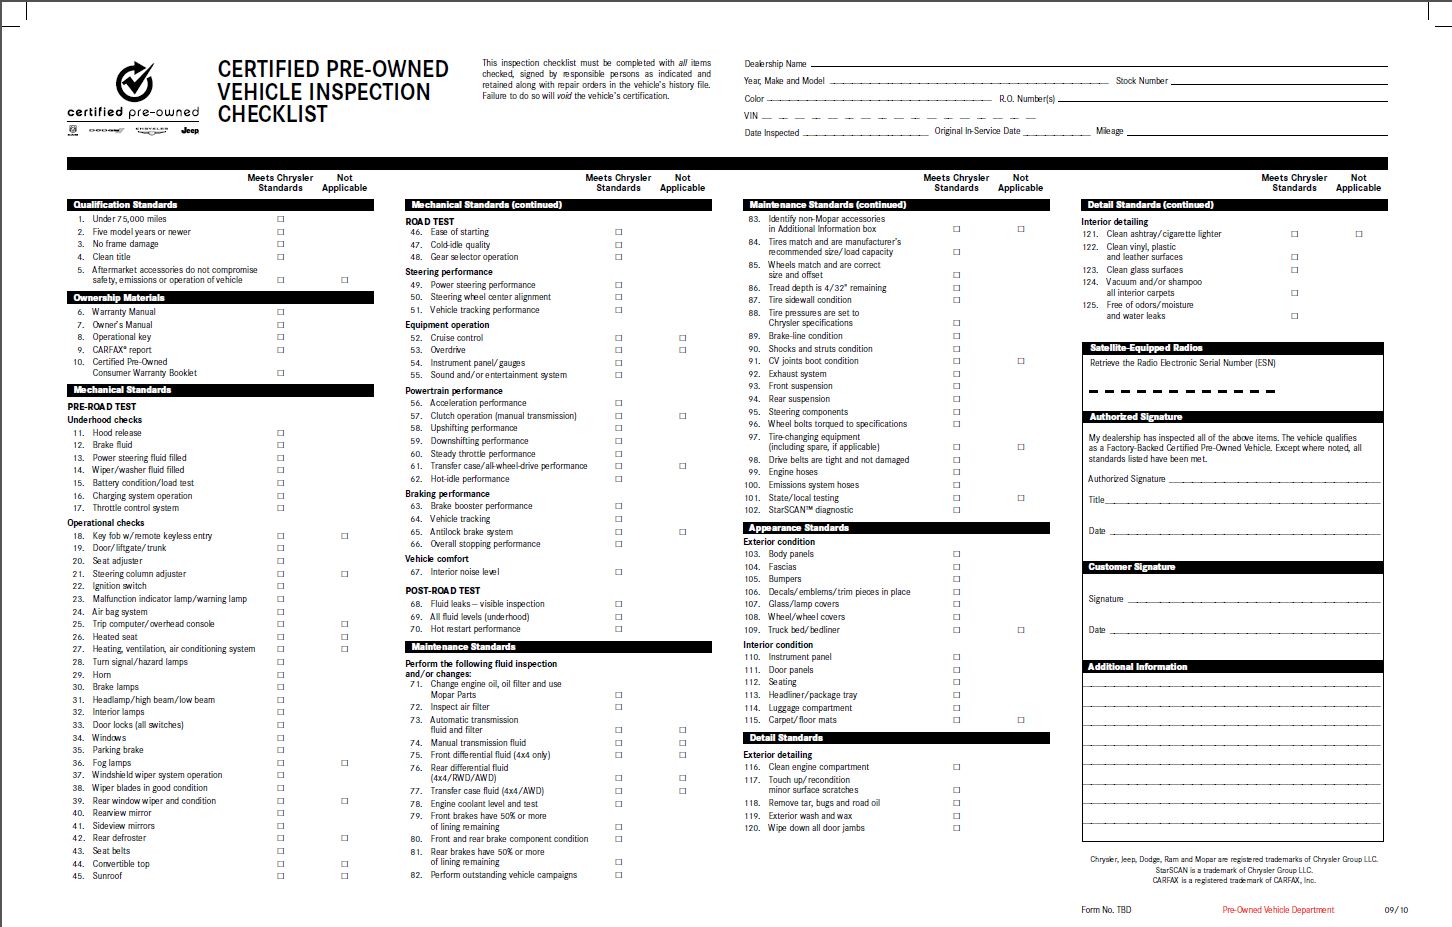 Chrysler new vehicle delivery check sheet